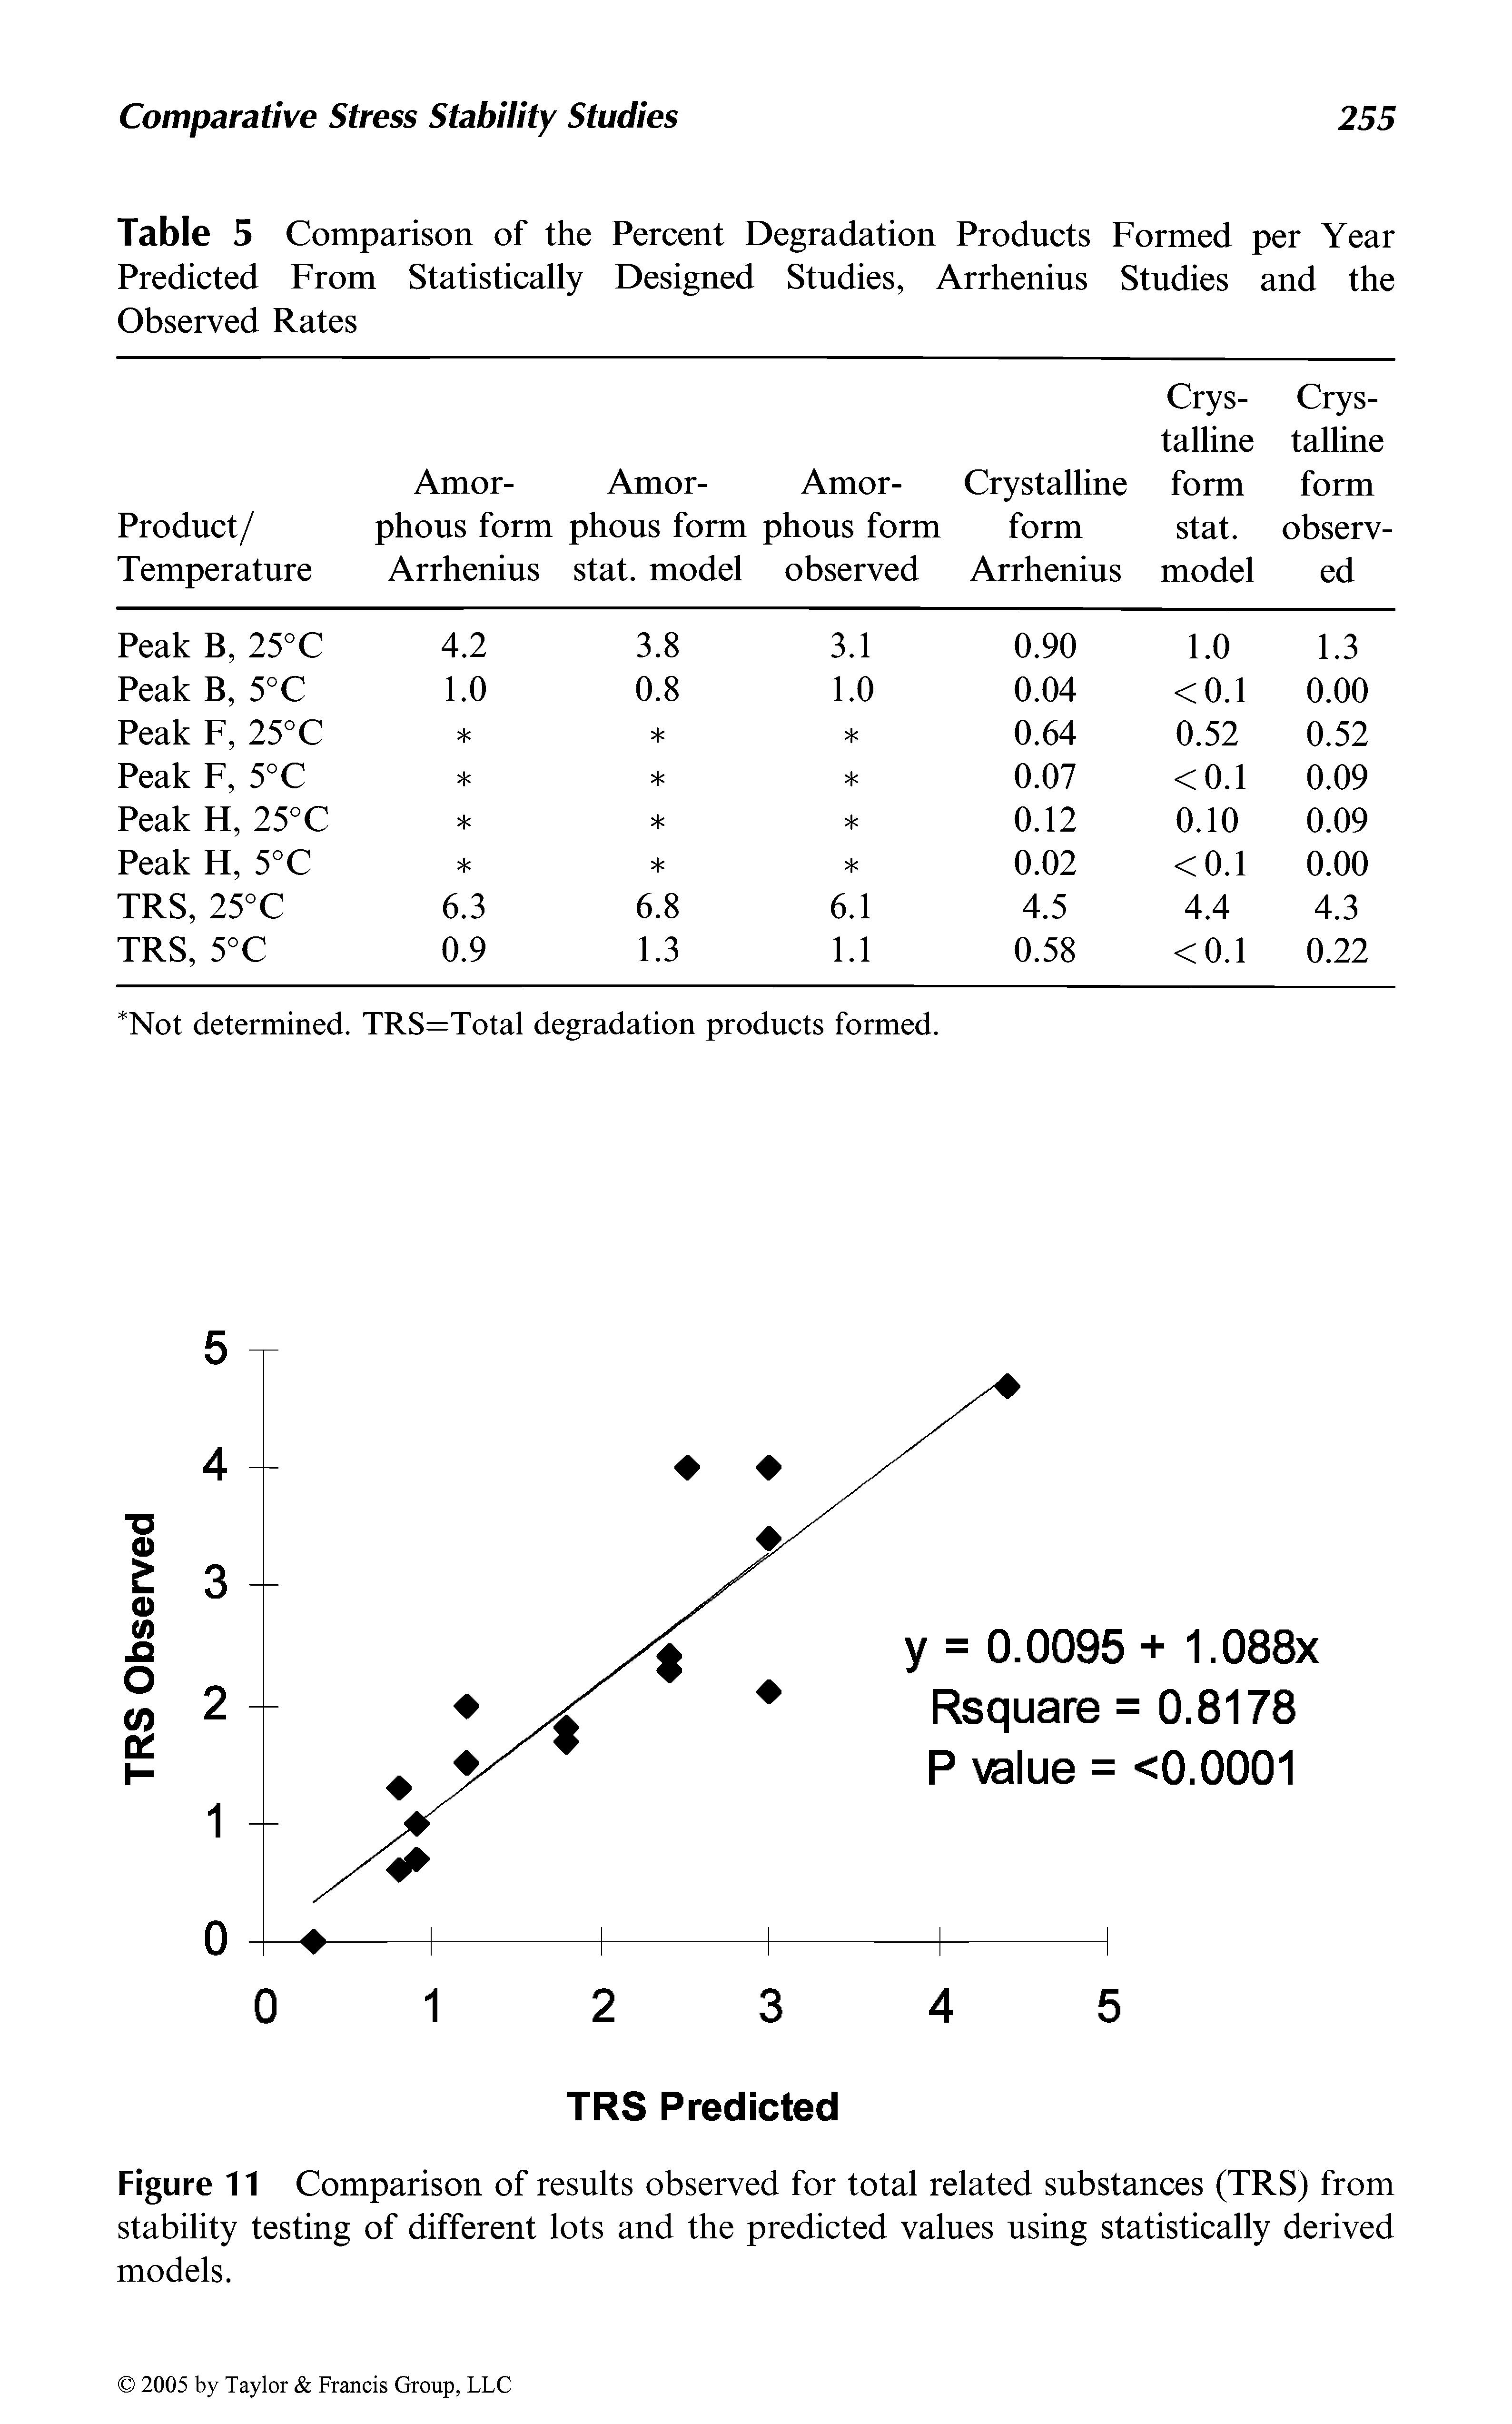 Figure 11 Comparison of results observed for total related substances (TRS) from stability testing of different lots and the predicted values using statistically derived models.